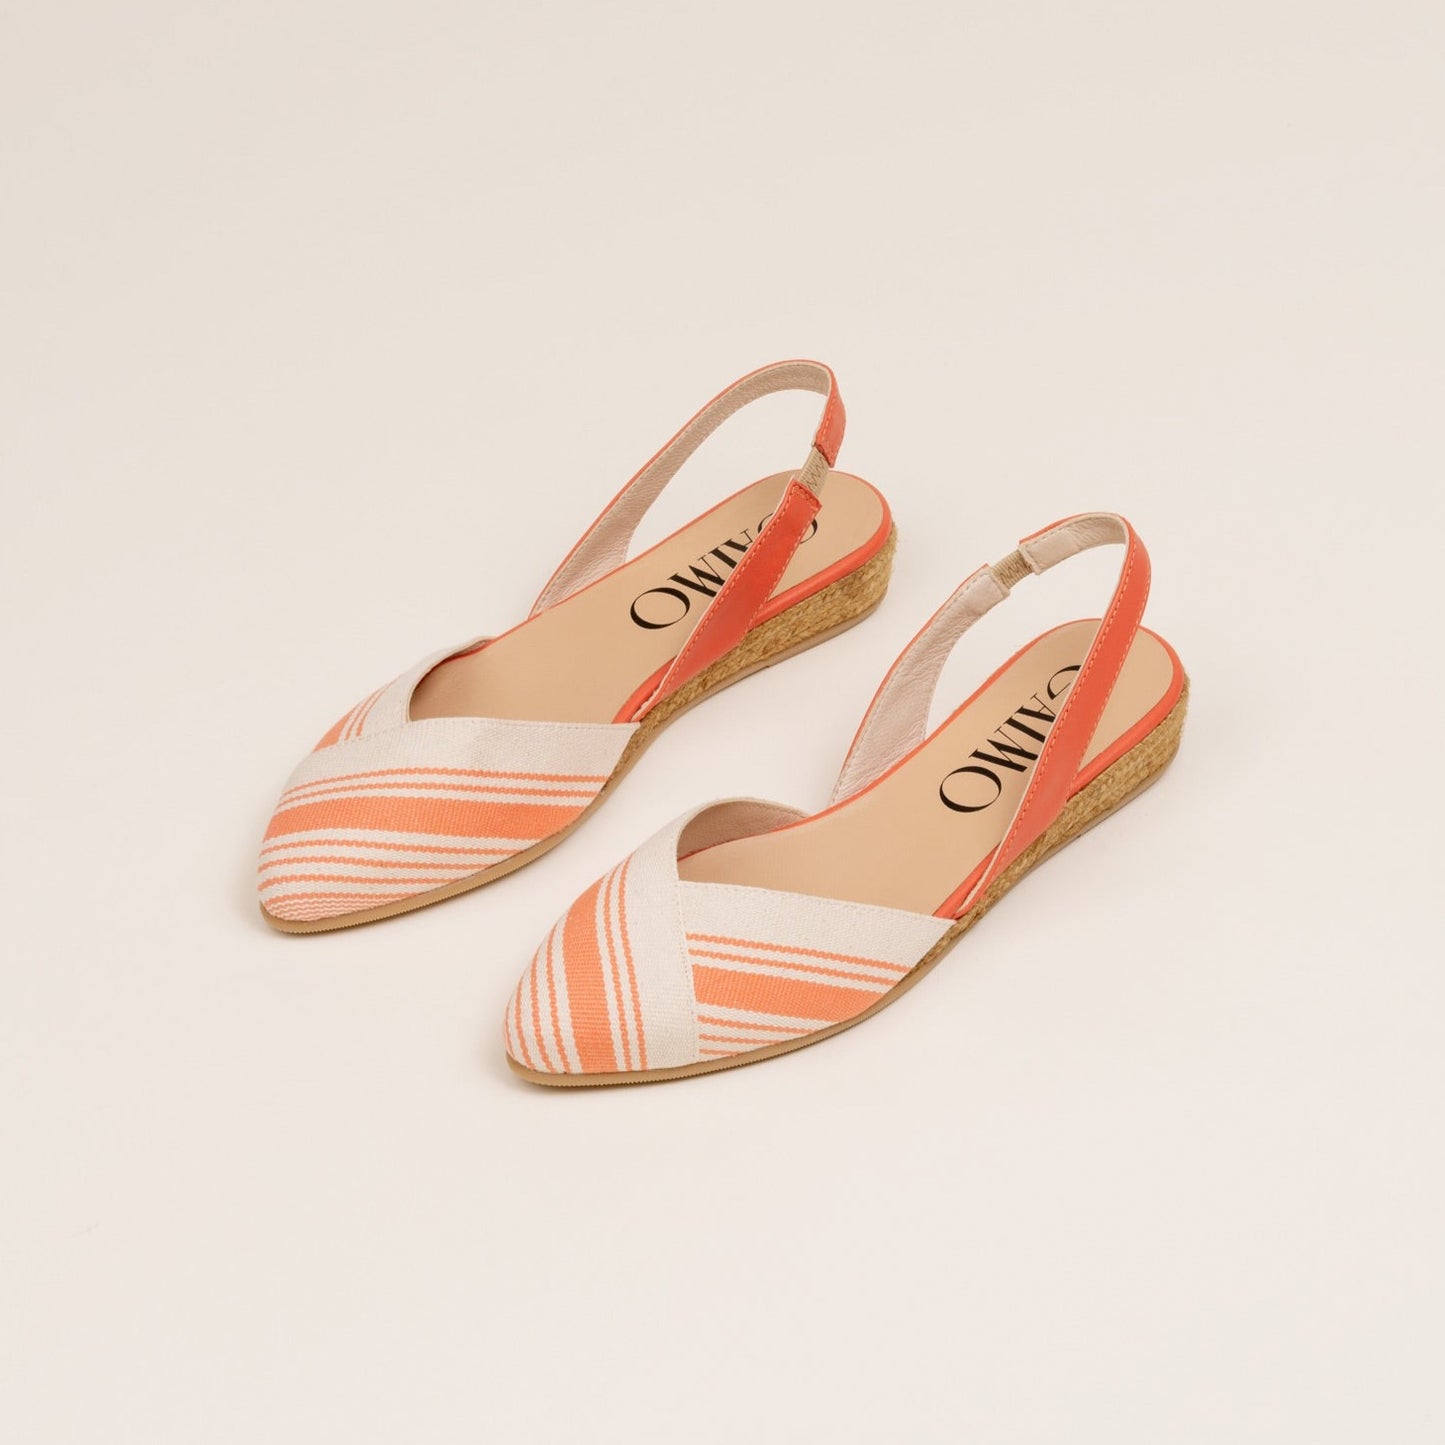 Sandals handmade espadrilles in jute, canvas and leather in coral and off white colour